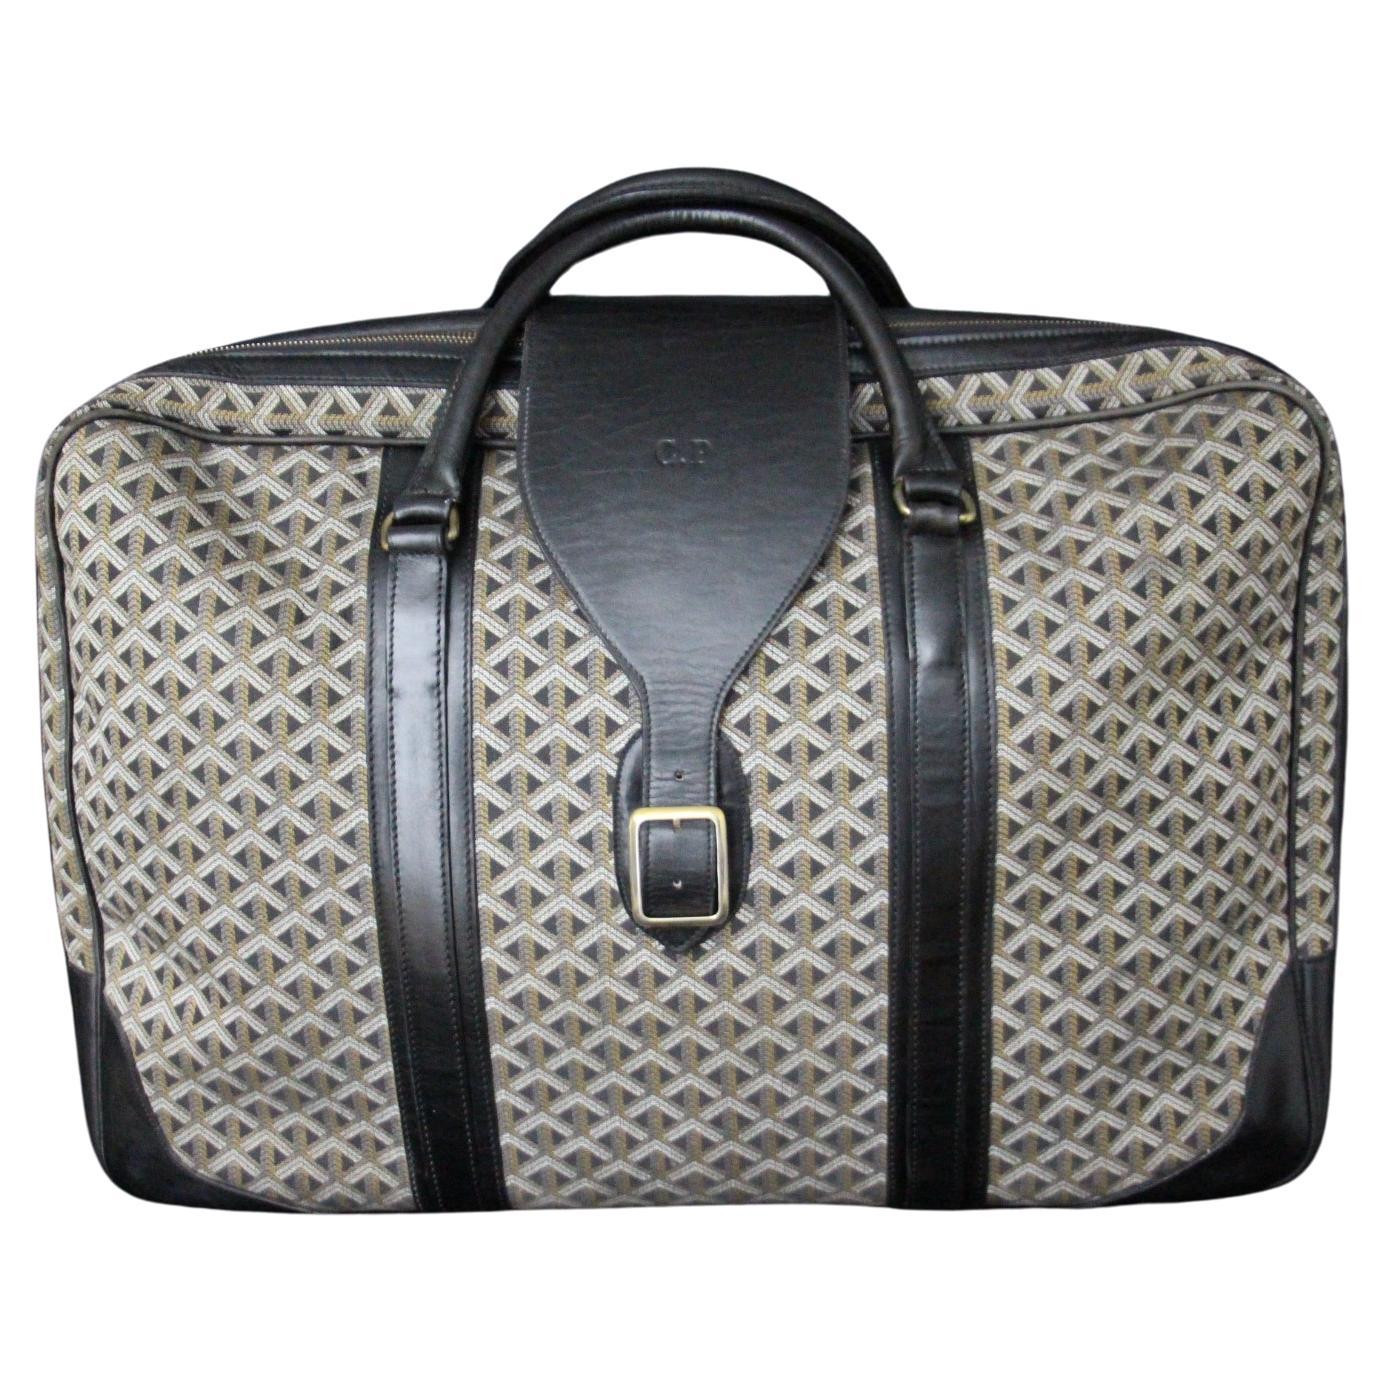 How much does a Goyard bag cost?